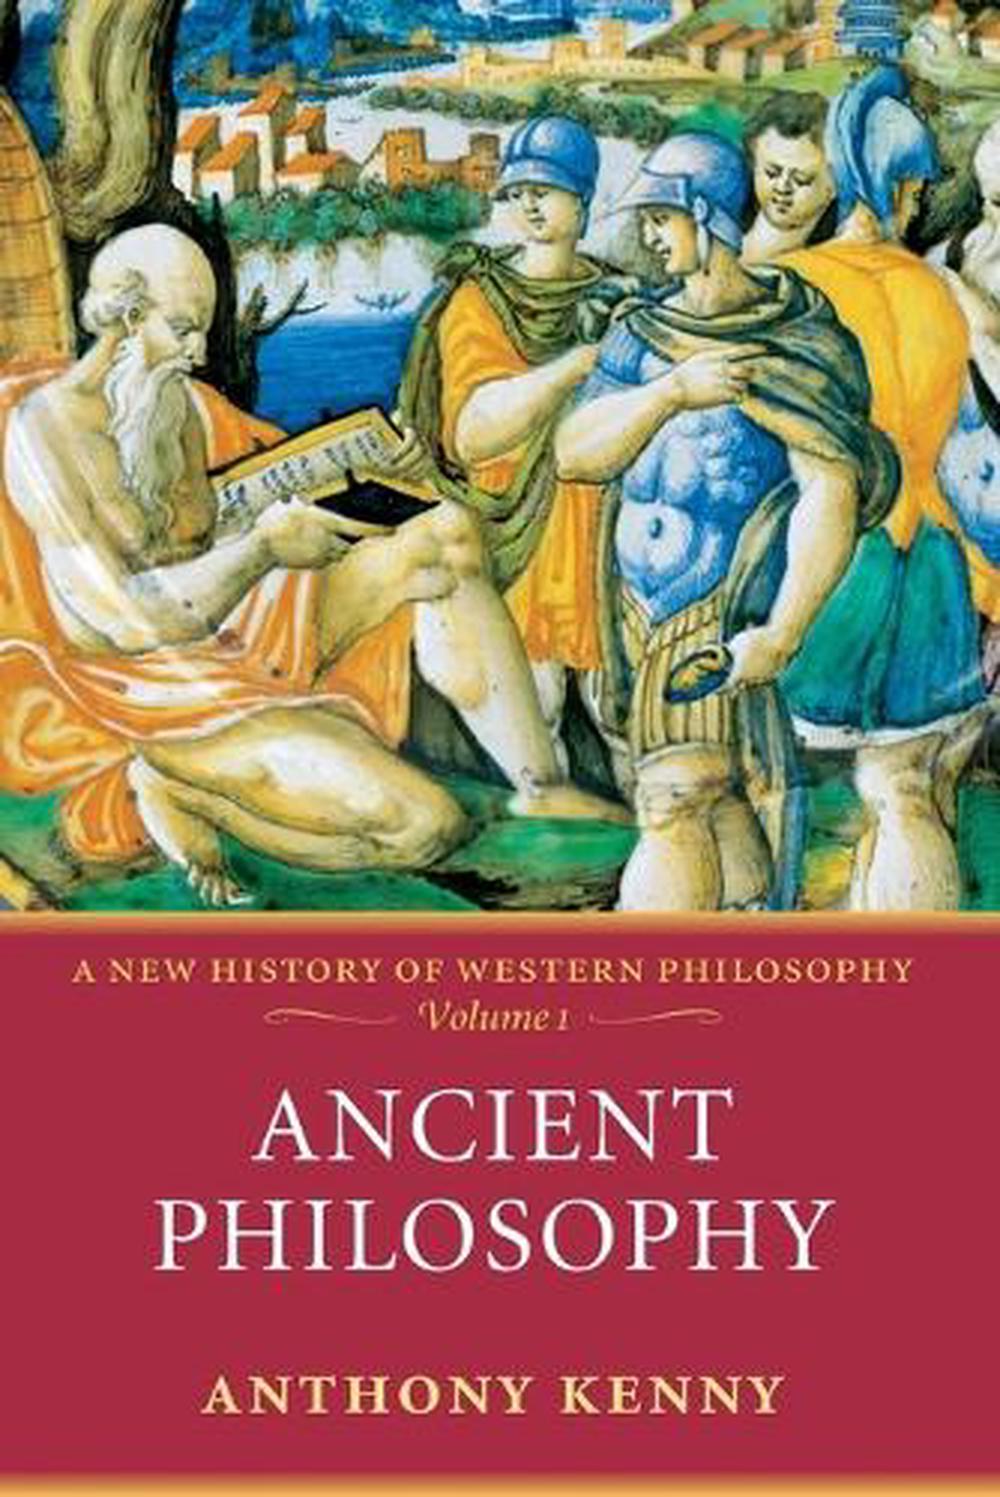 Ancient Philosophy: A New History of Western Philosophy, Volume 1 by ... - 9780198752721